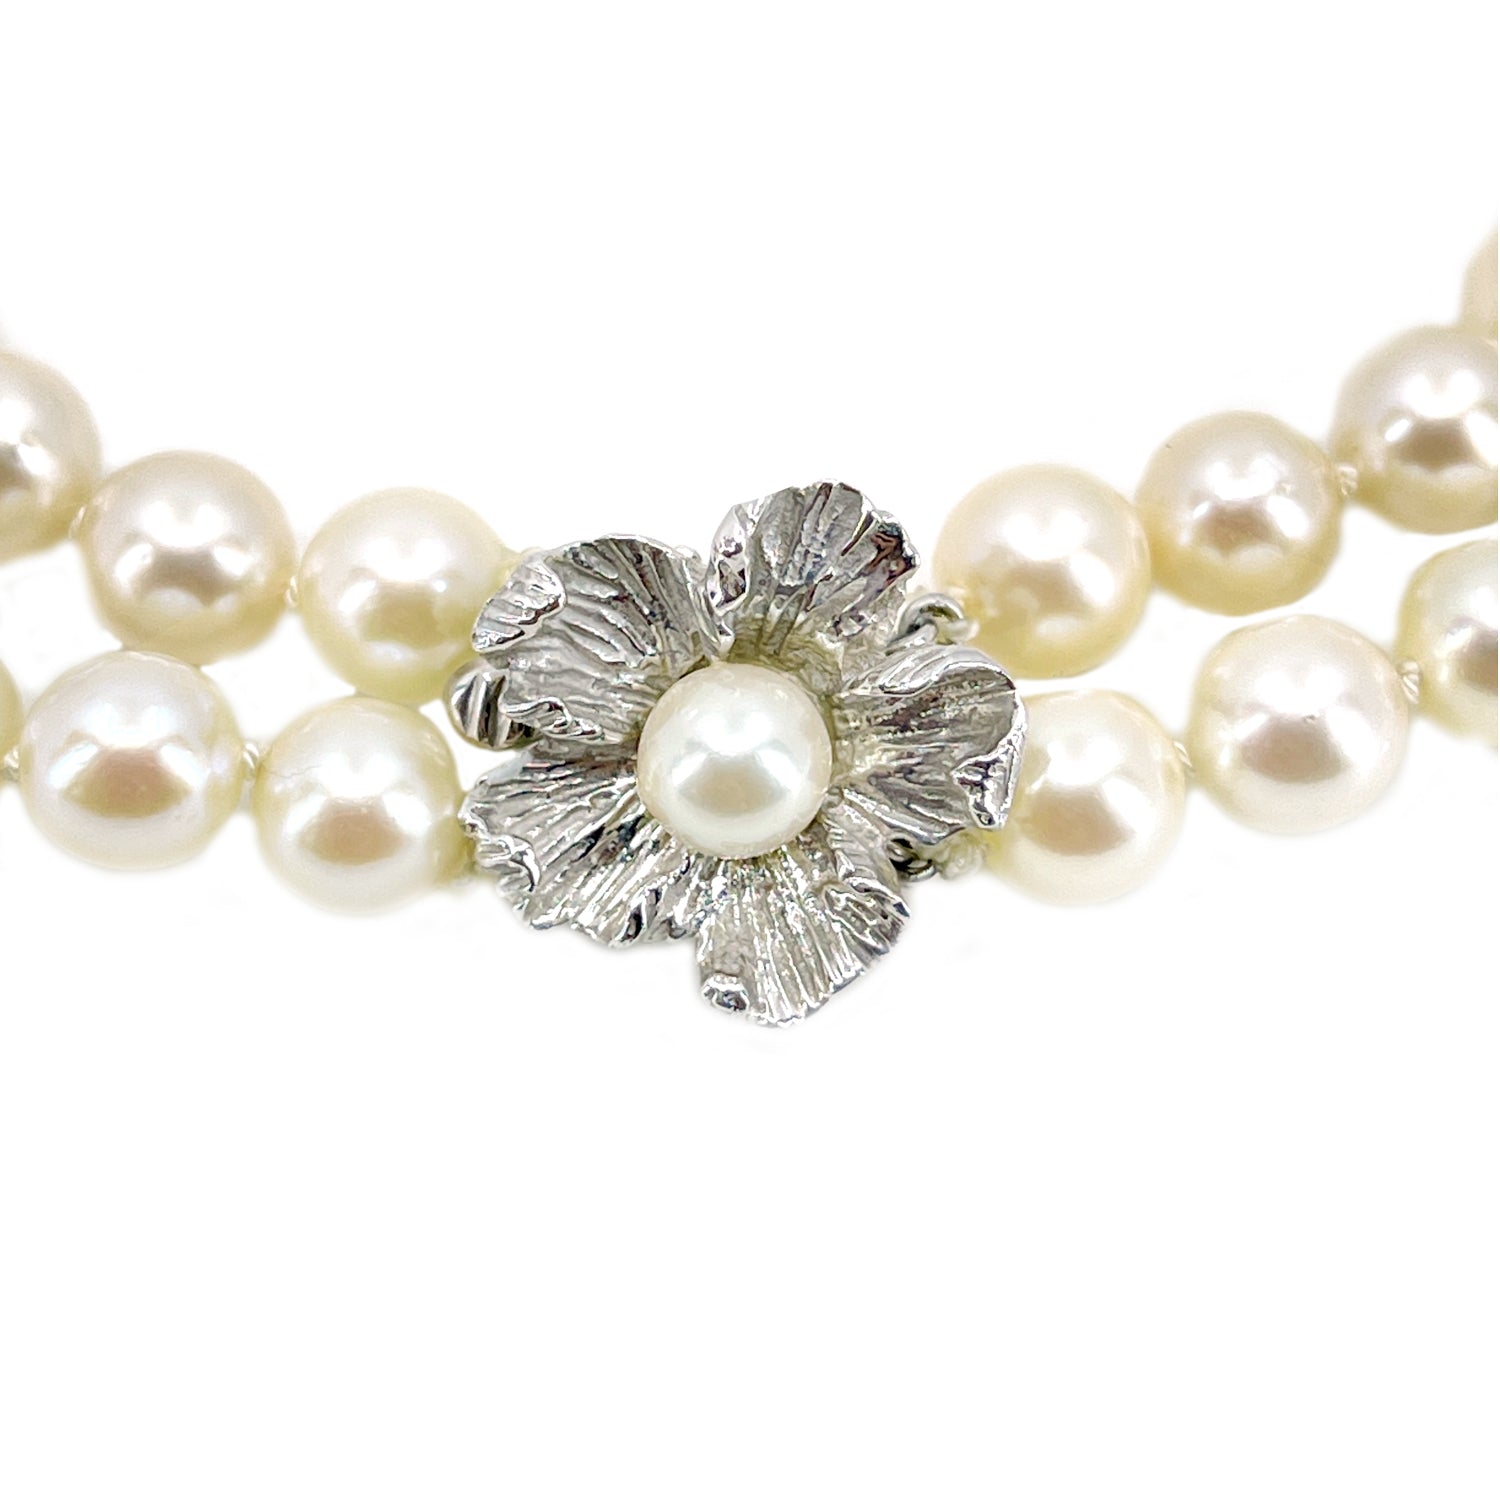 Vintage Japanese Saltewater Akoya Cultured Pearl Double Strand Floral Necklace - 14K White Gold 24.50 & 25.50 Inch